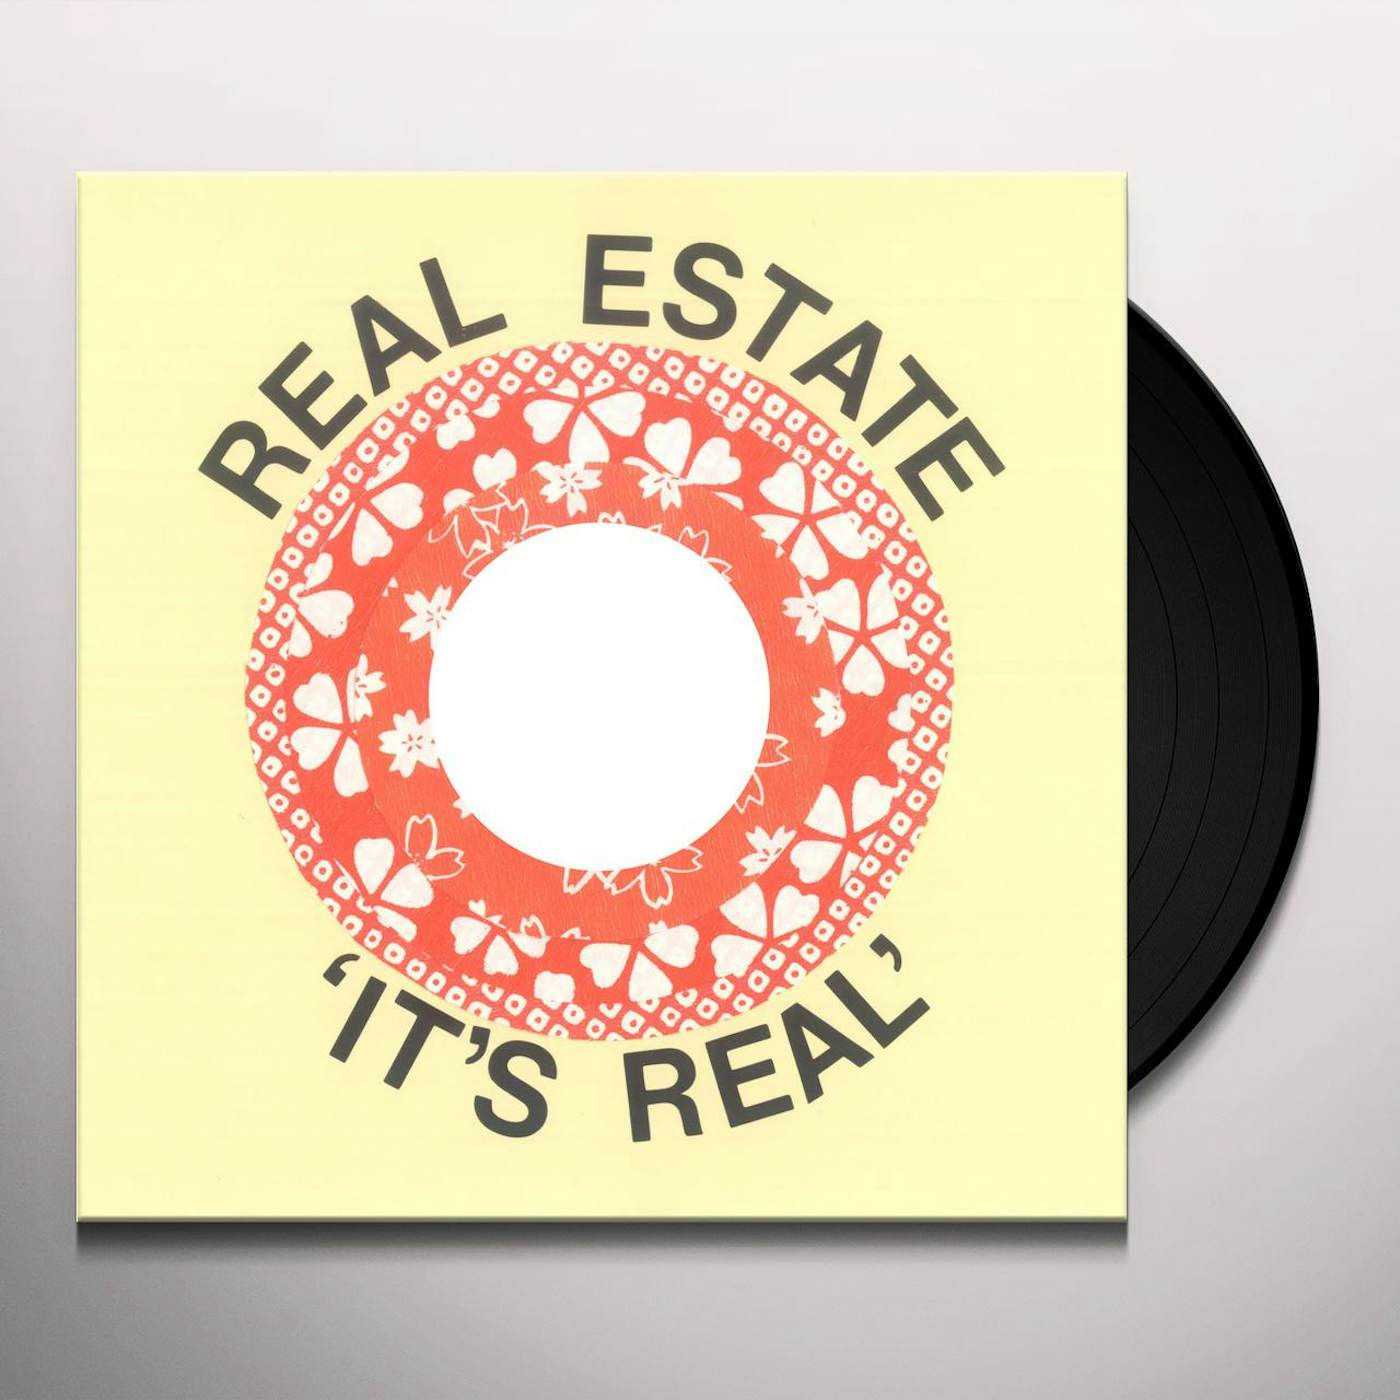 Real Estate IT'S REAL Vinyl Record - Limited Edition